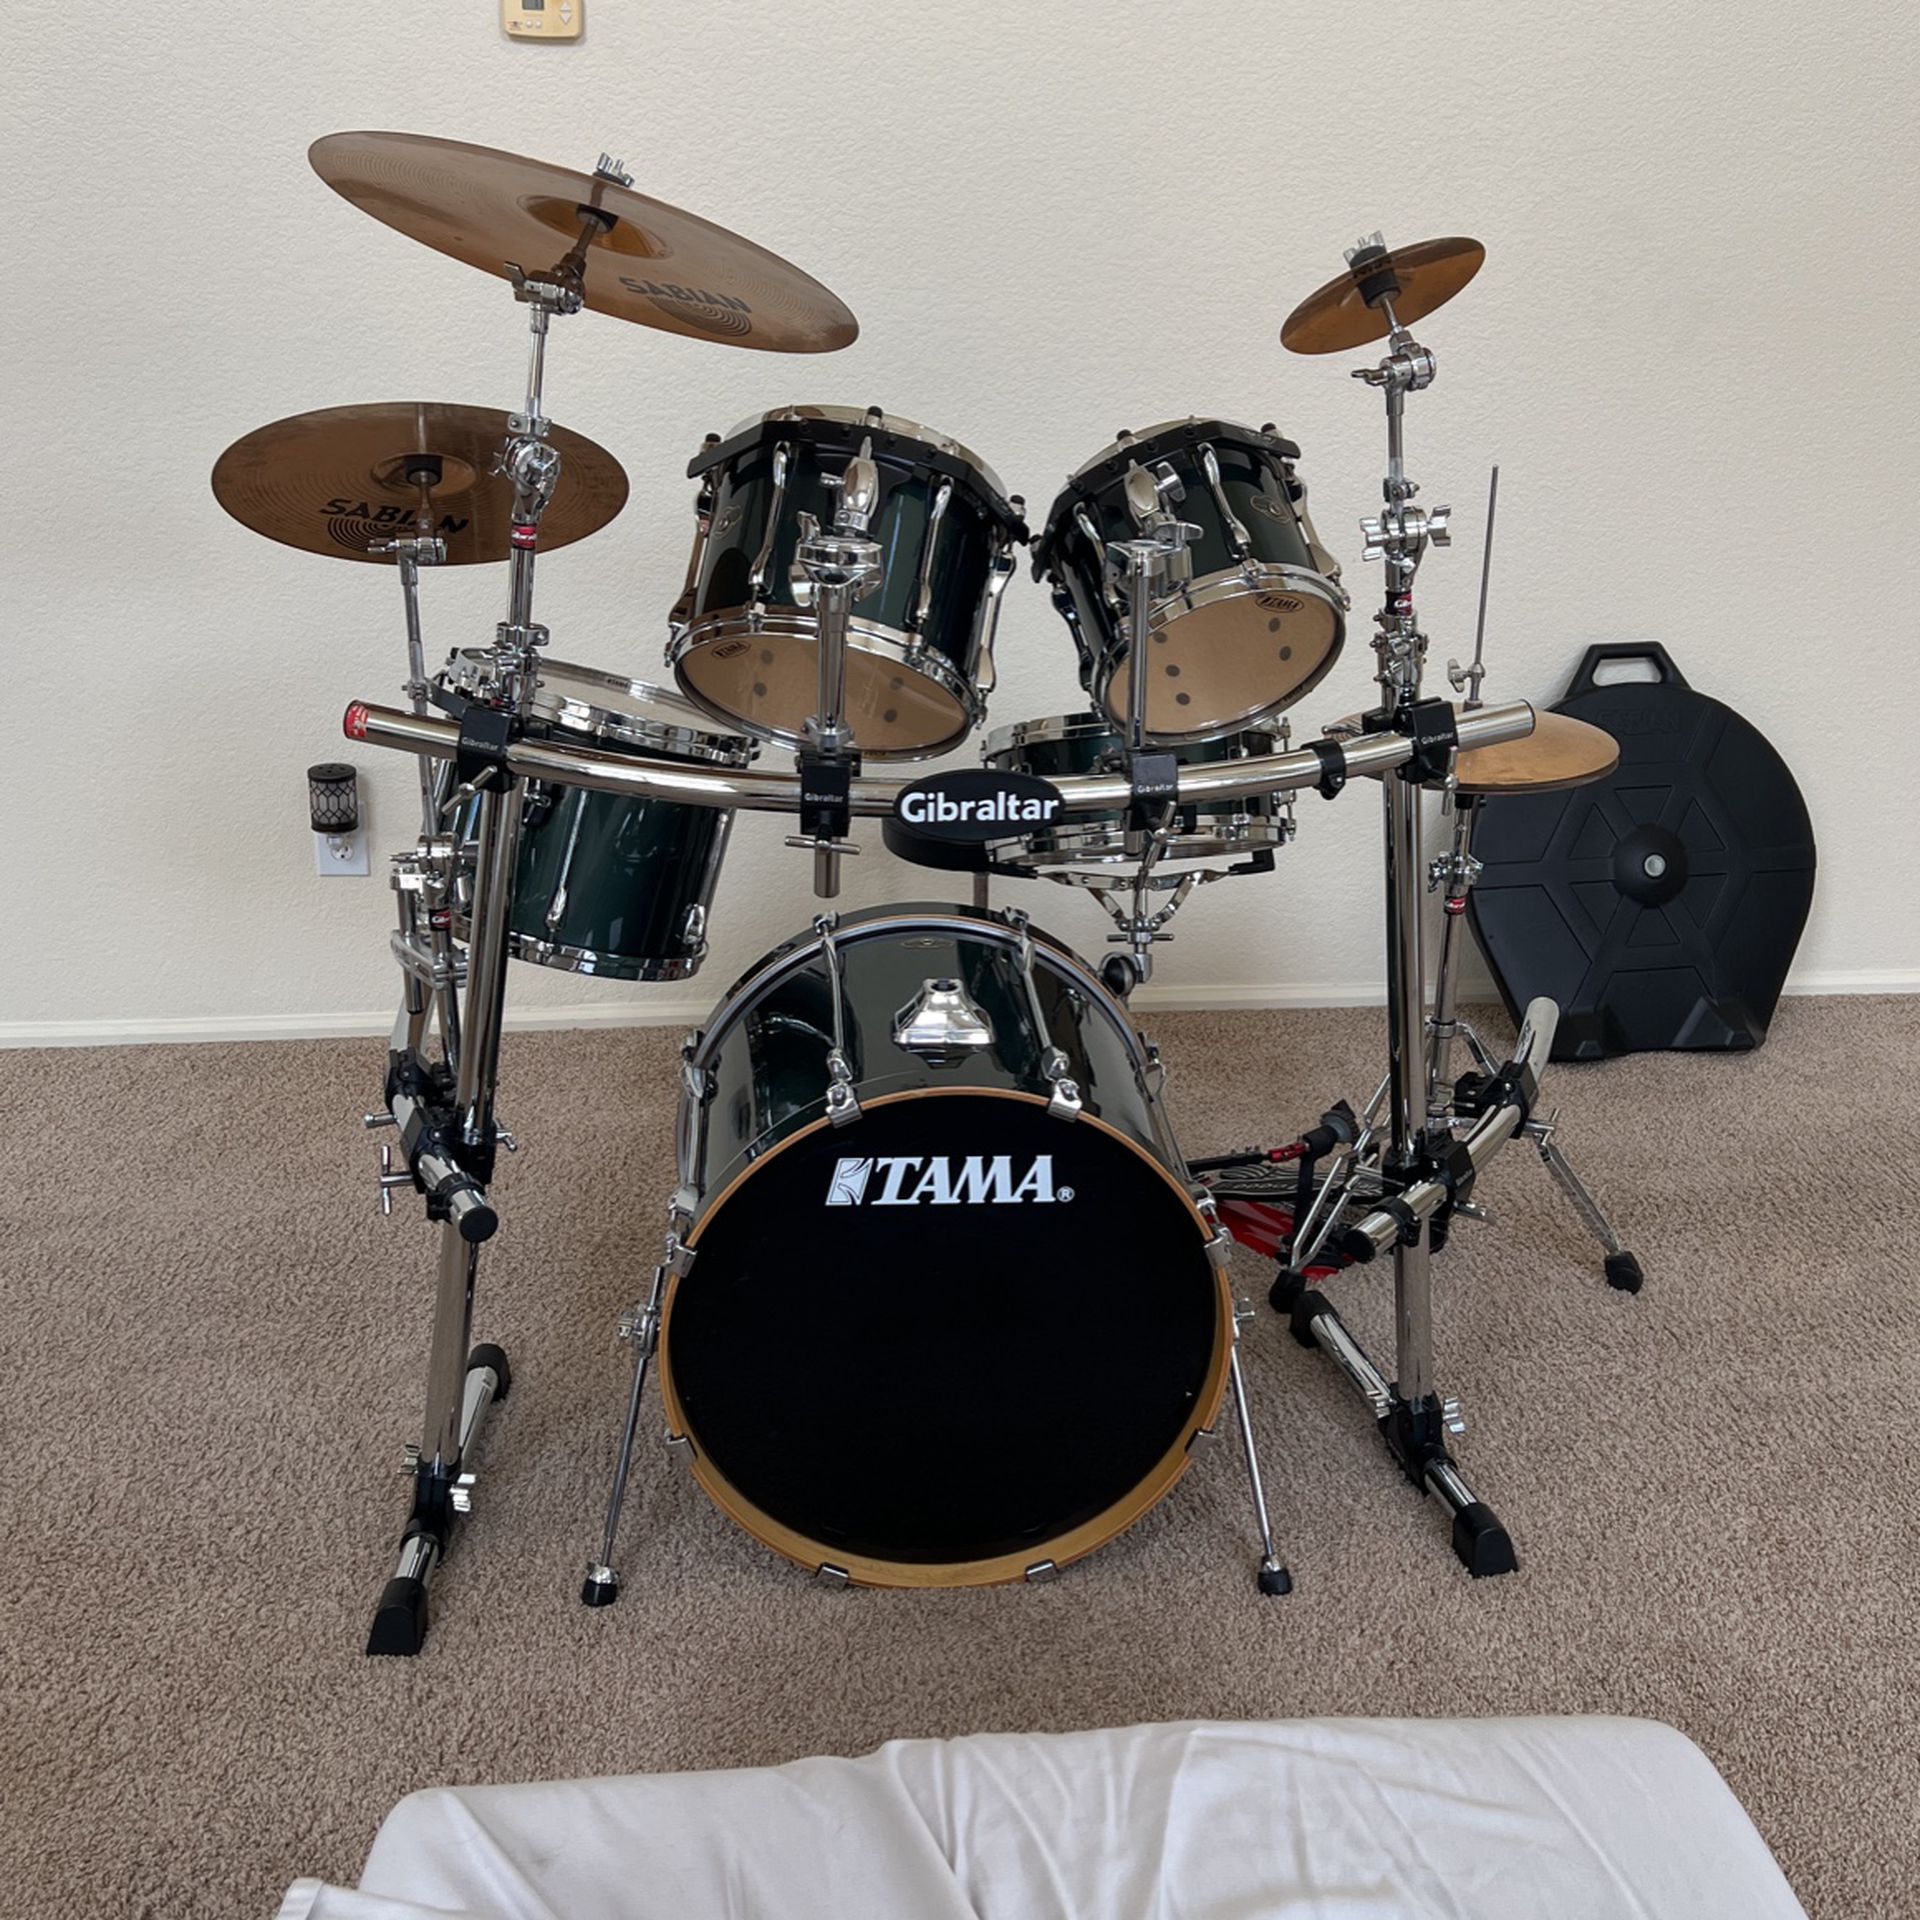 Tama Drum Set. Petals Not Included, Can Be Purchased Separately.